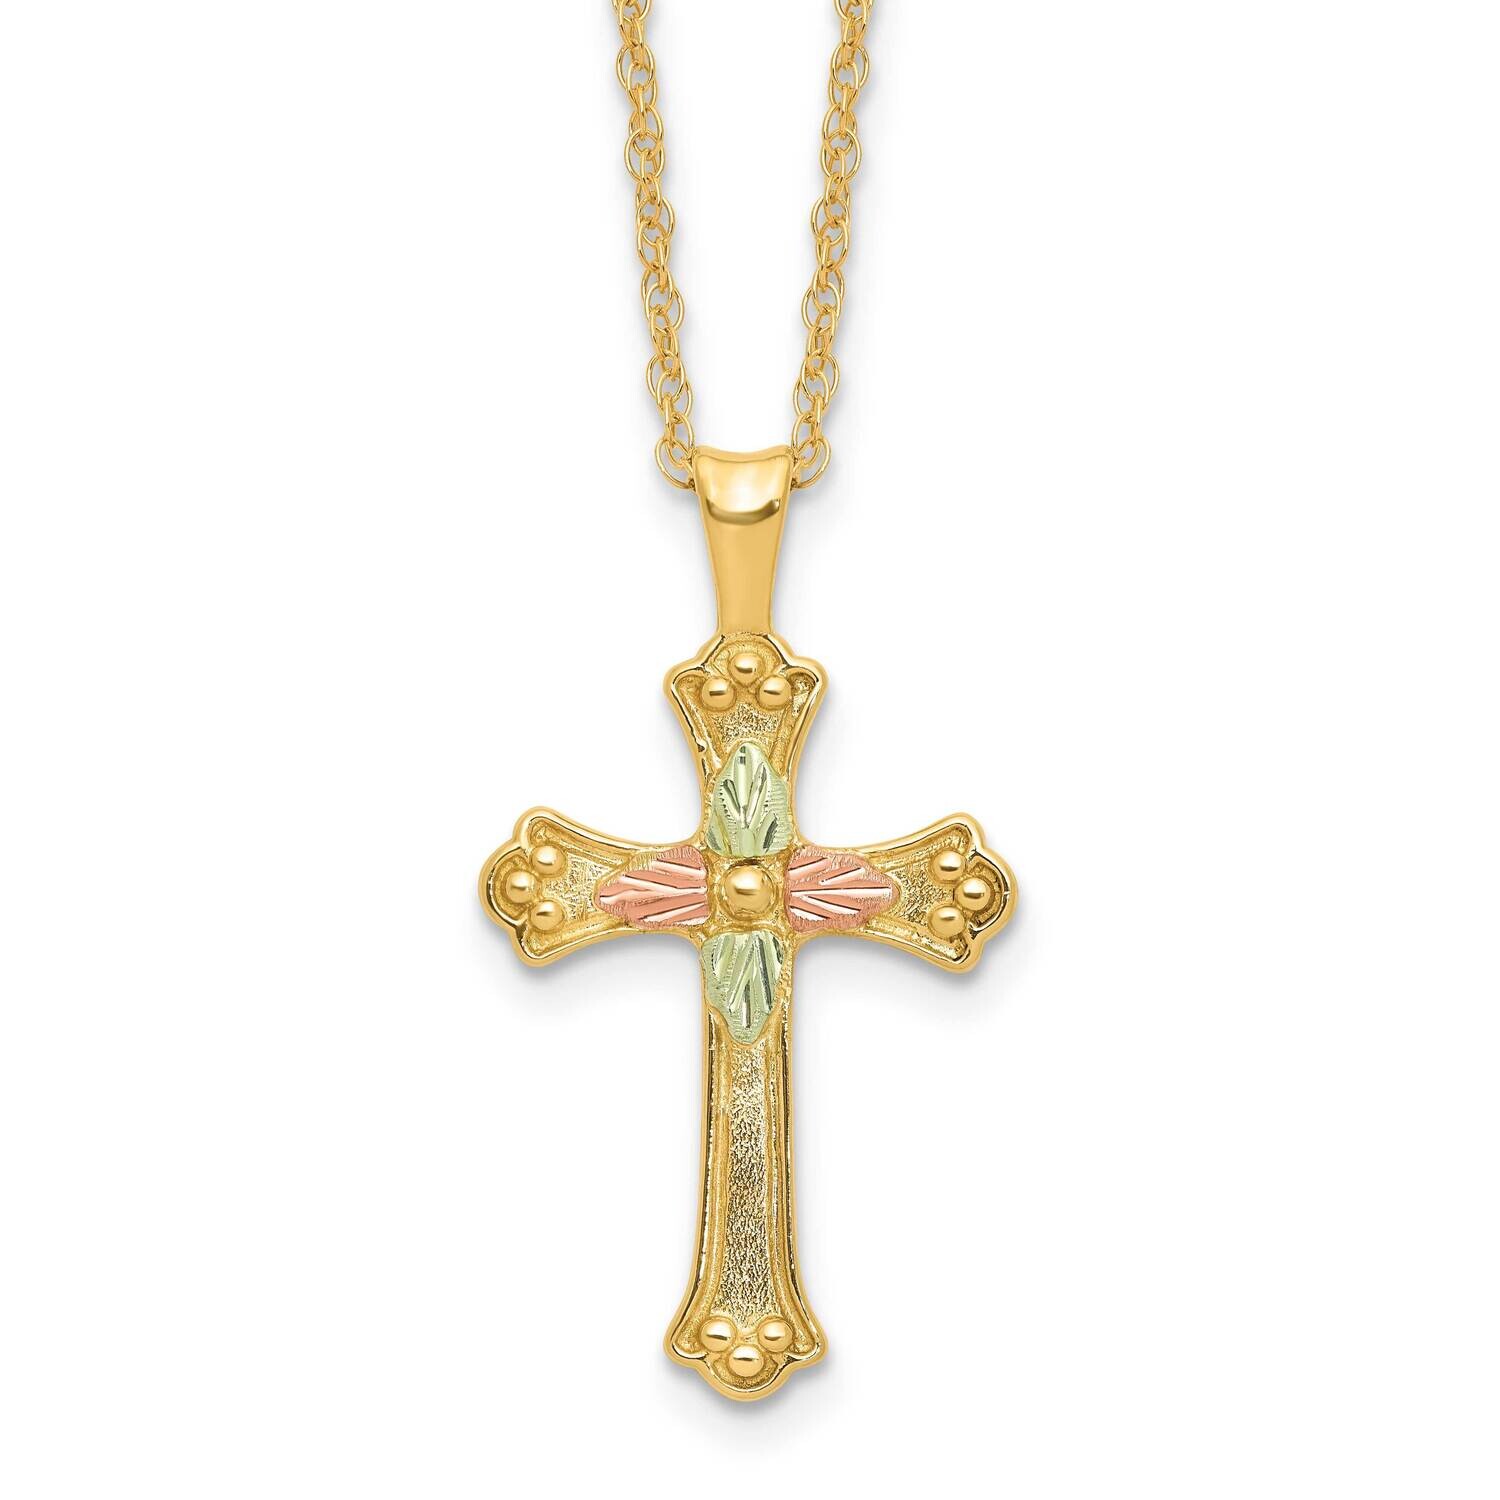 12K Accents Black Hills Gold Cross 18 Inch Necklace 10k Gold 10BH729-18